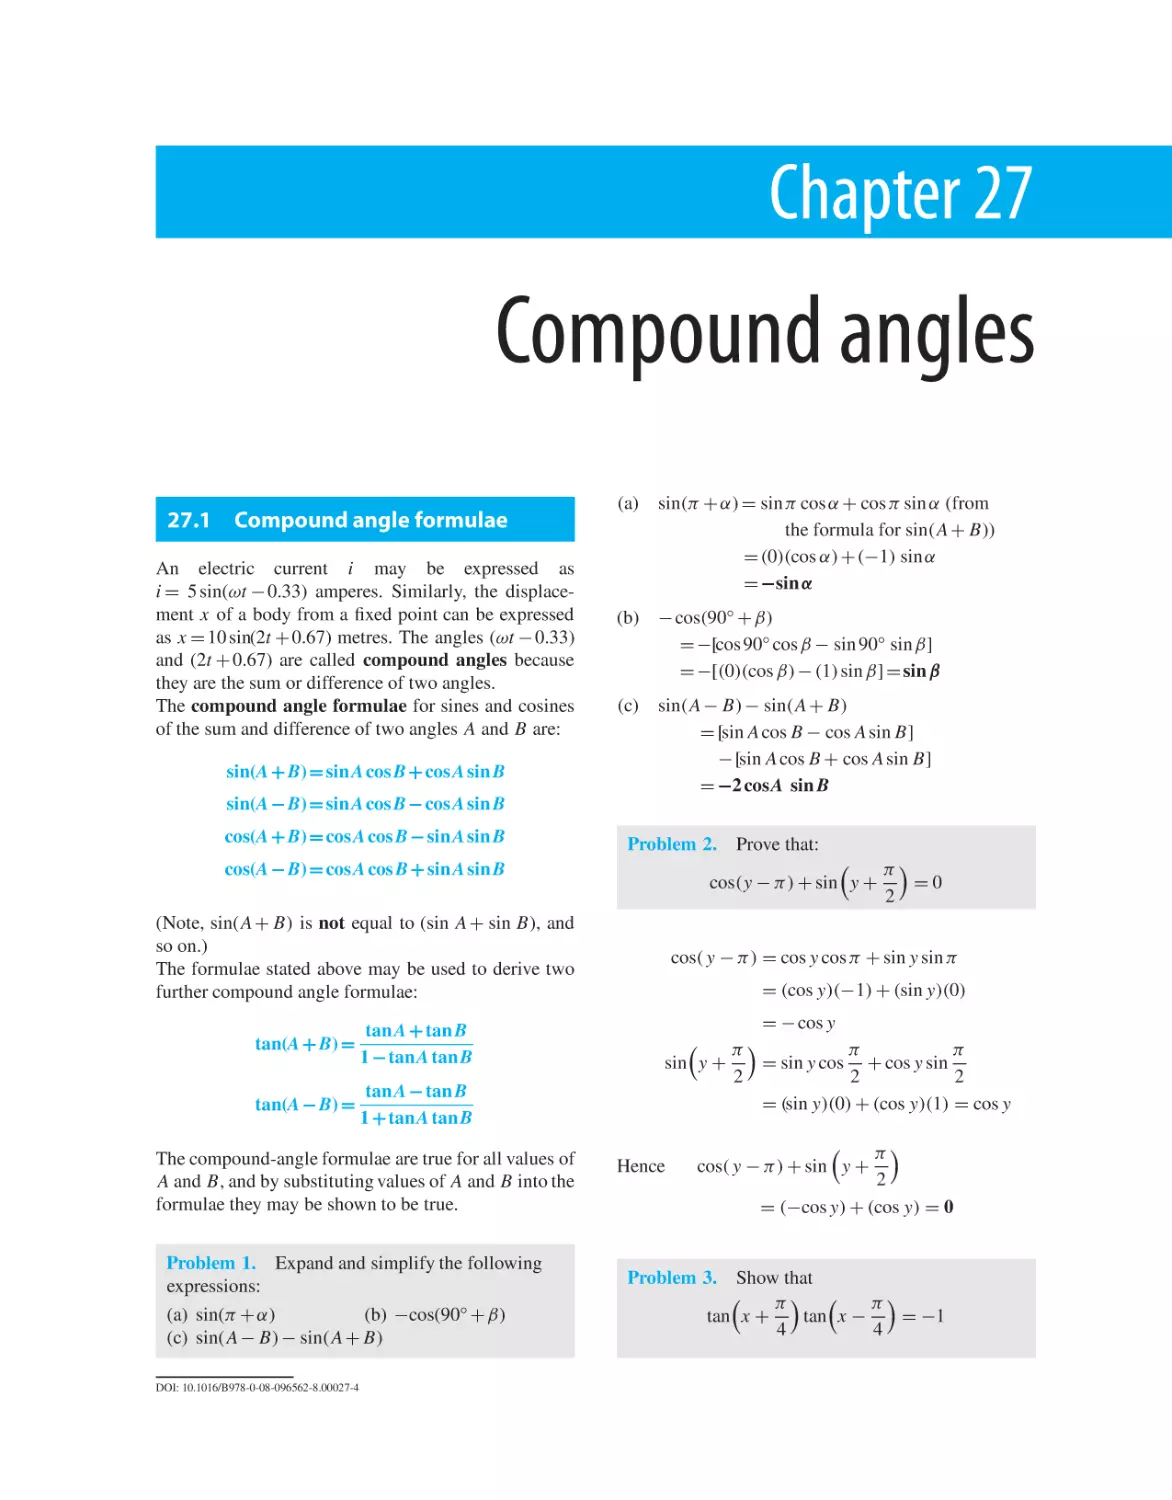 Chapter 27. Compound angles
27.1 Compound angle formulae